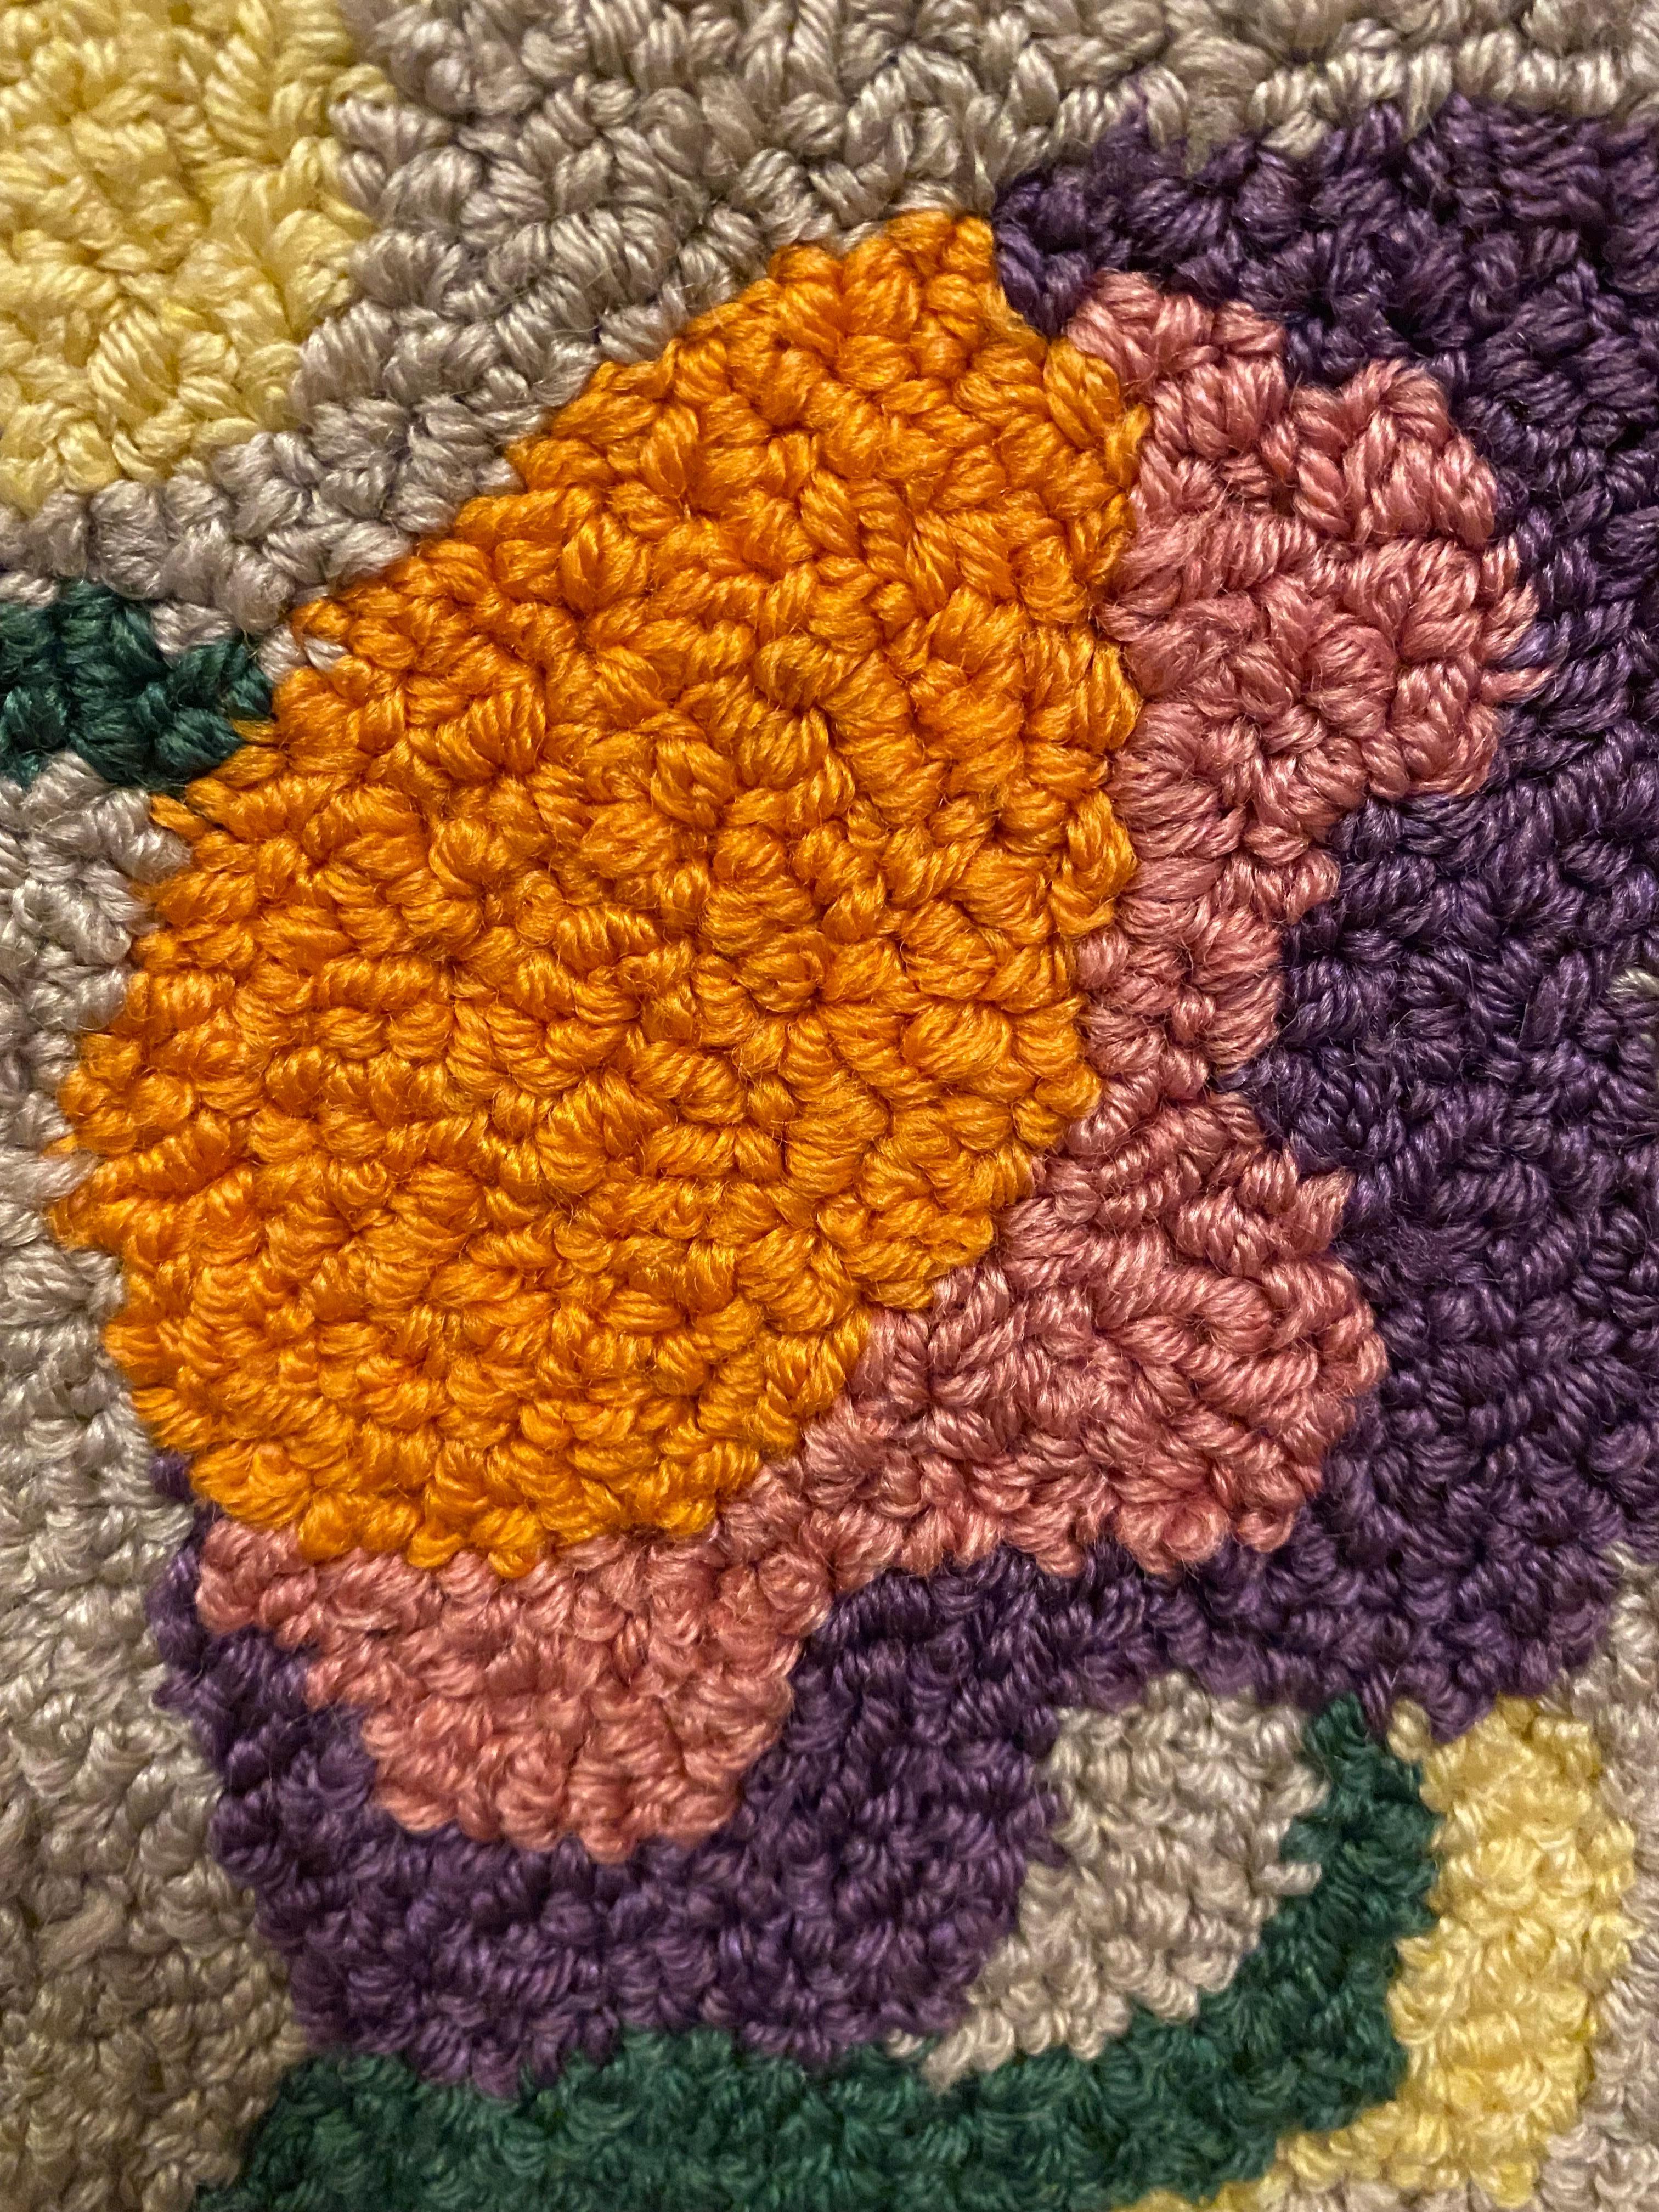 Mid-20th Century Floral Hook Rug in Shades of Purple and Orange